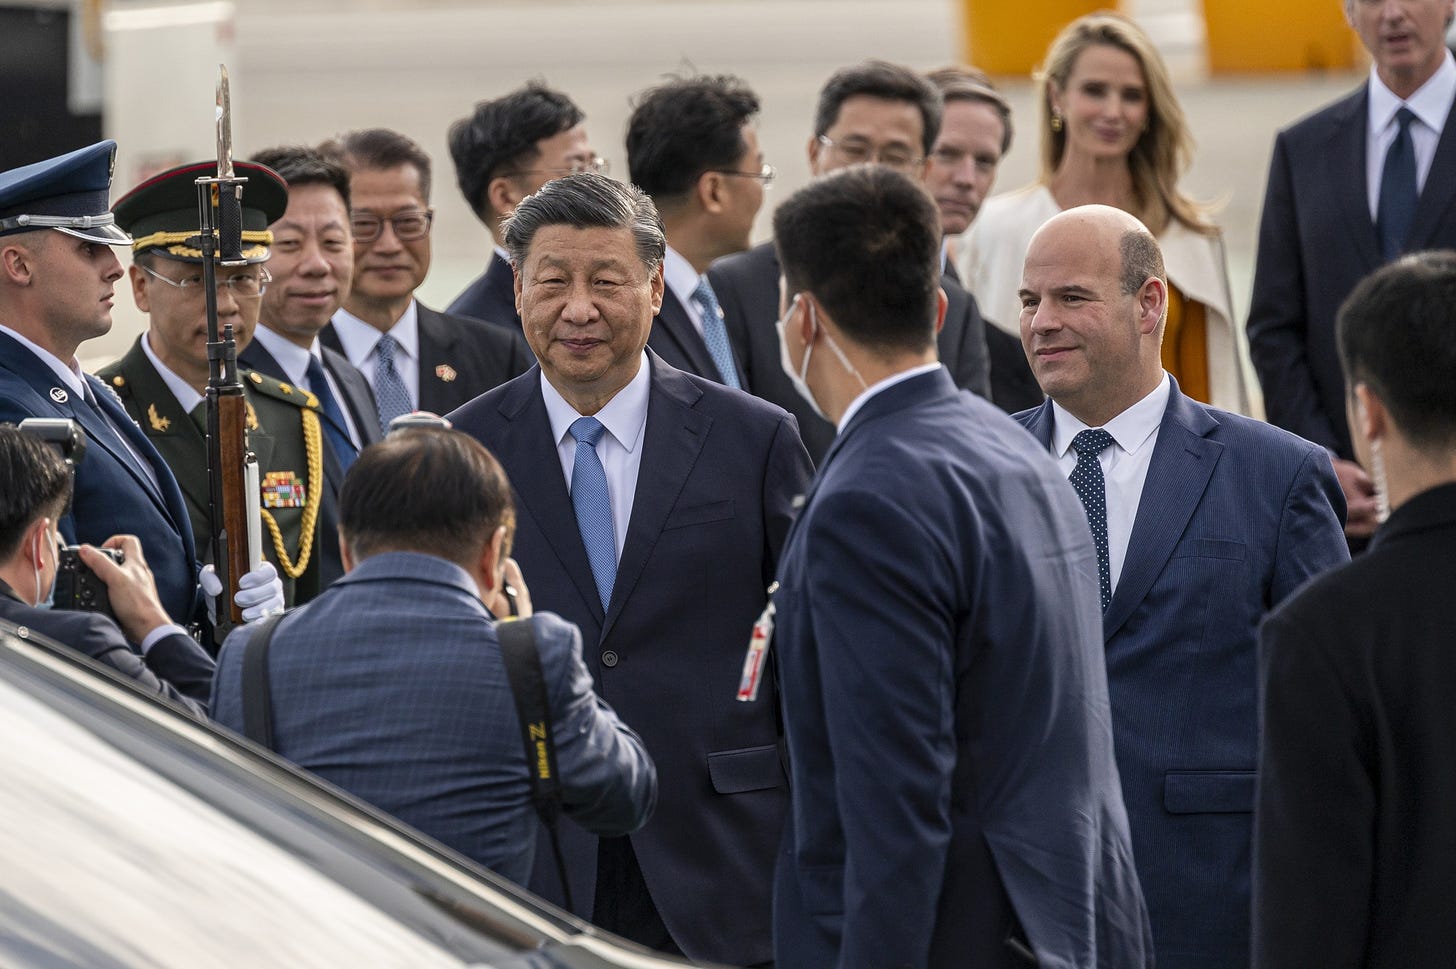 China's Xi Jinping Arrives in San Francisco For First US Trip in Six Years  - Bloomberg